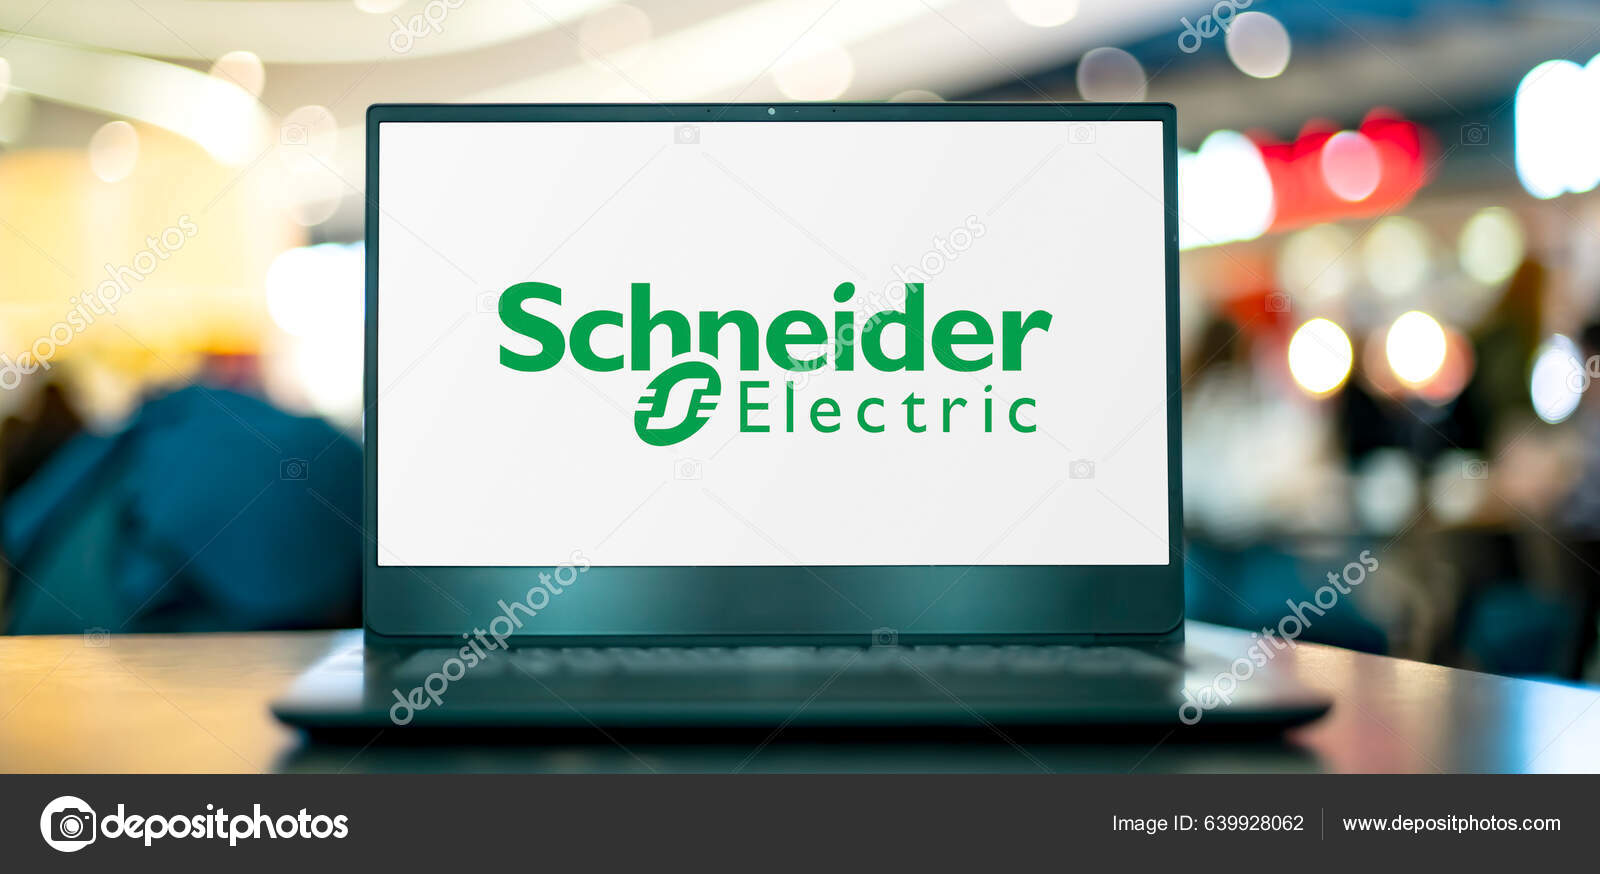 Achieve more by being our industrial partner | Schneider Electric USA